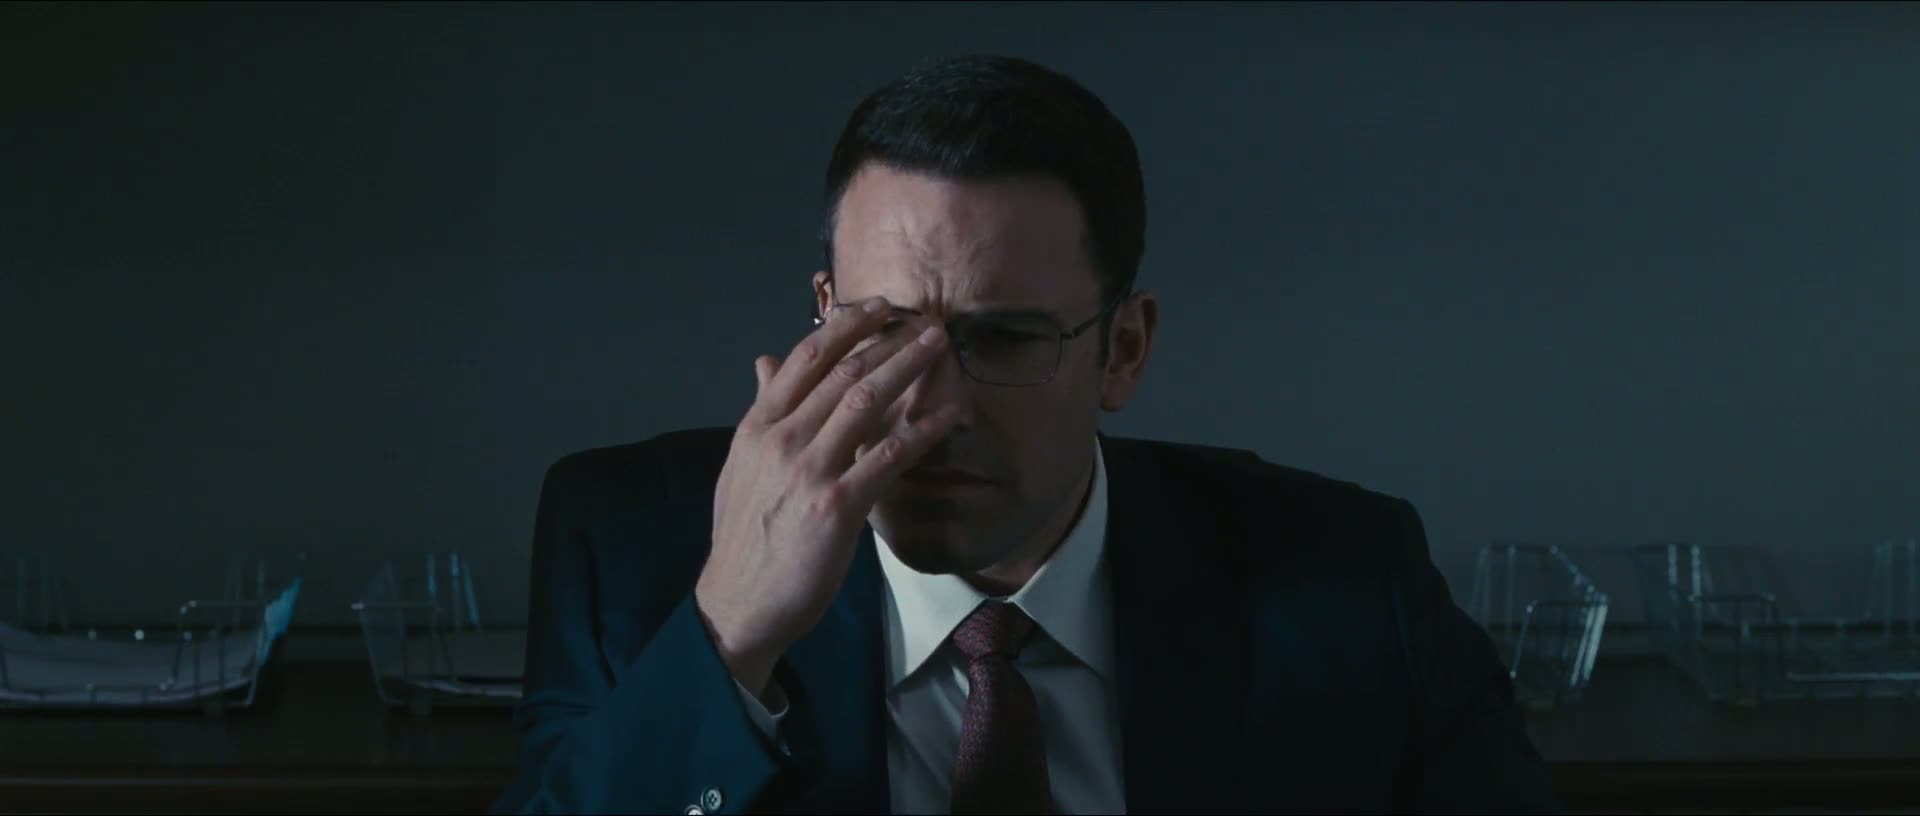 the_accountant_official_trailer.jpg